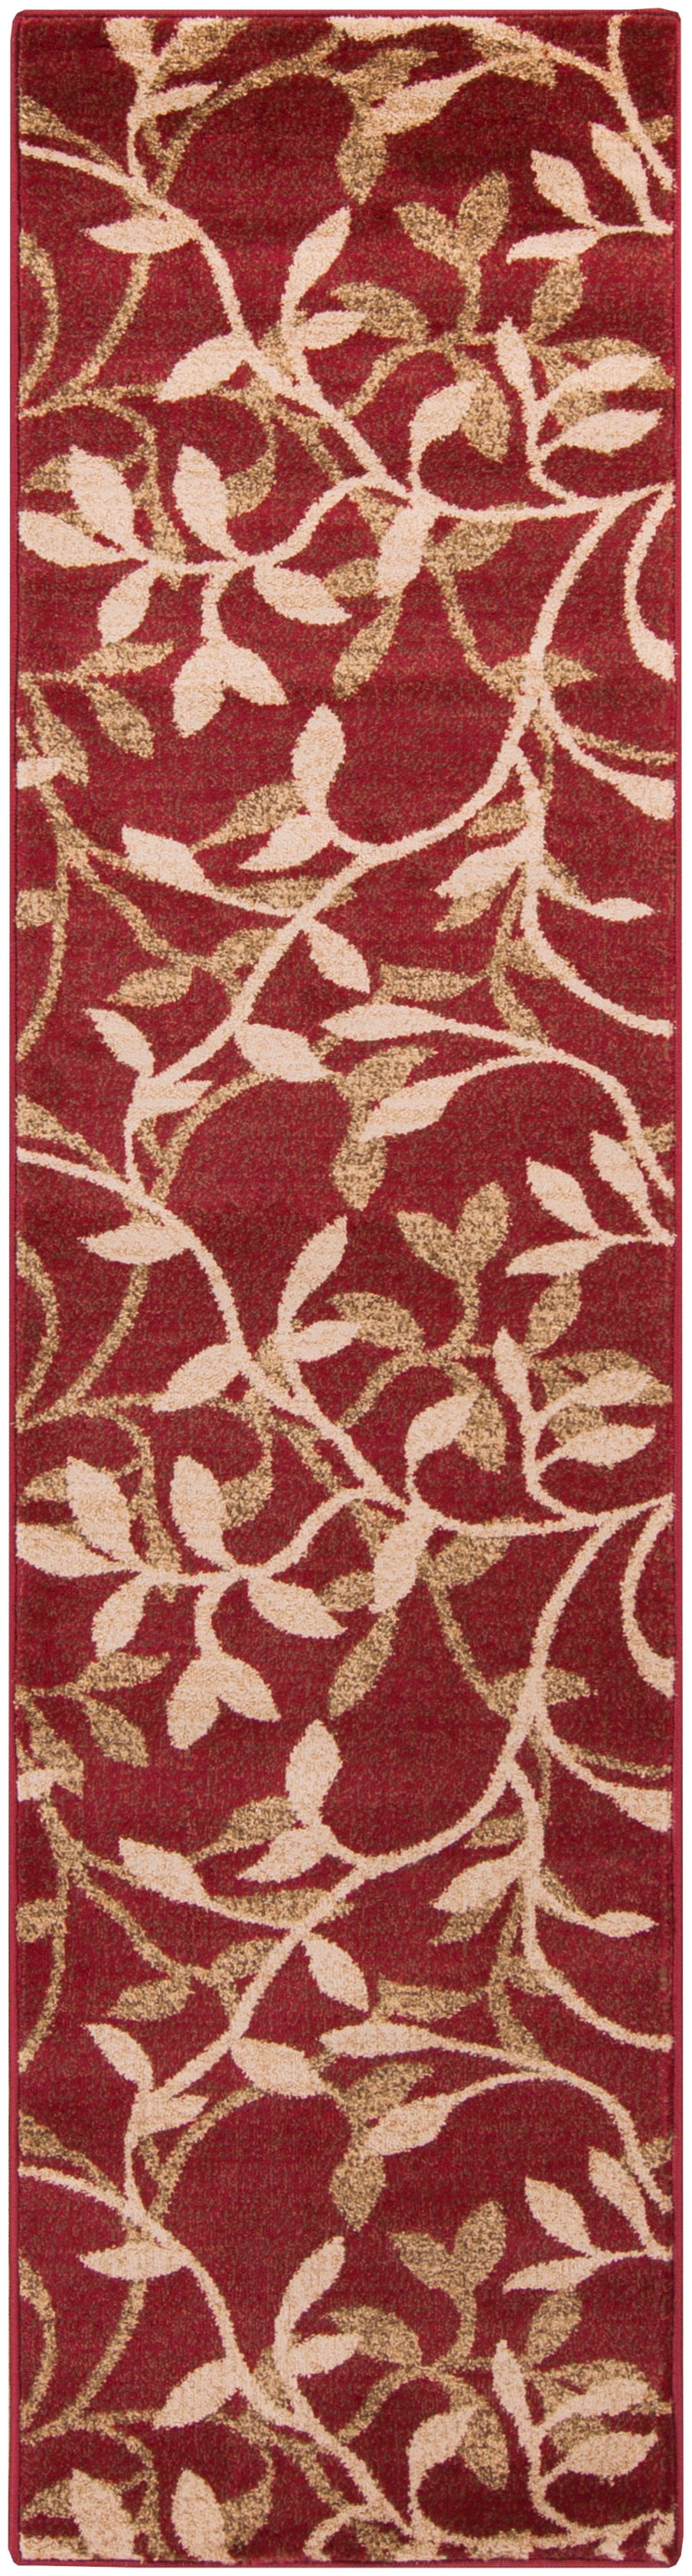 Surya Riley RLY5011 Brown/Neutral Transitional Area Rug